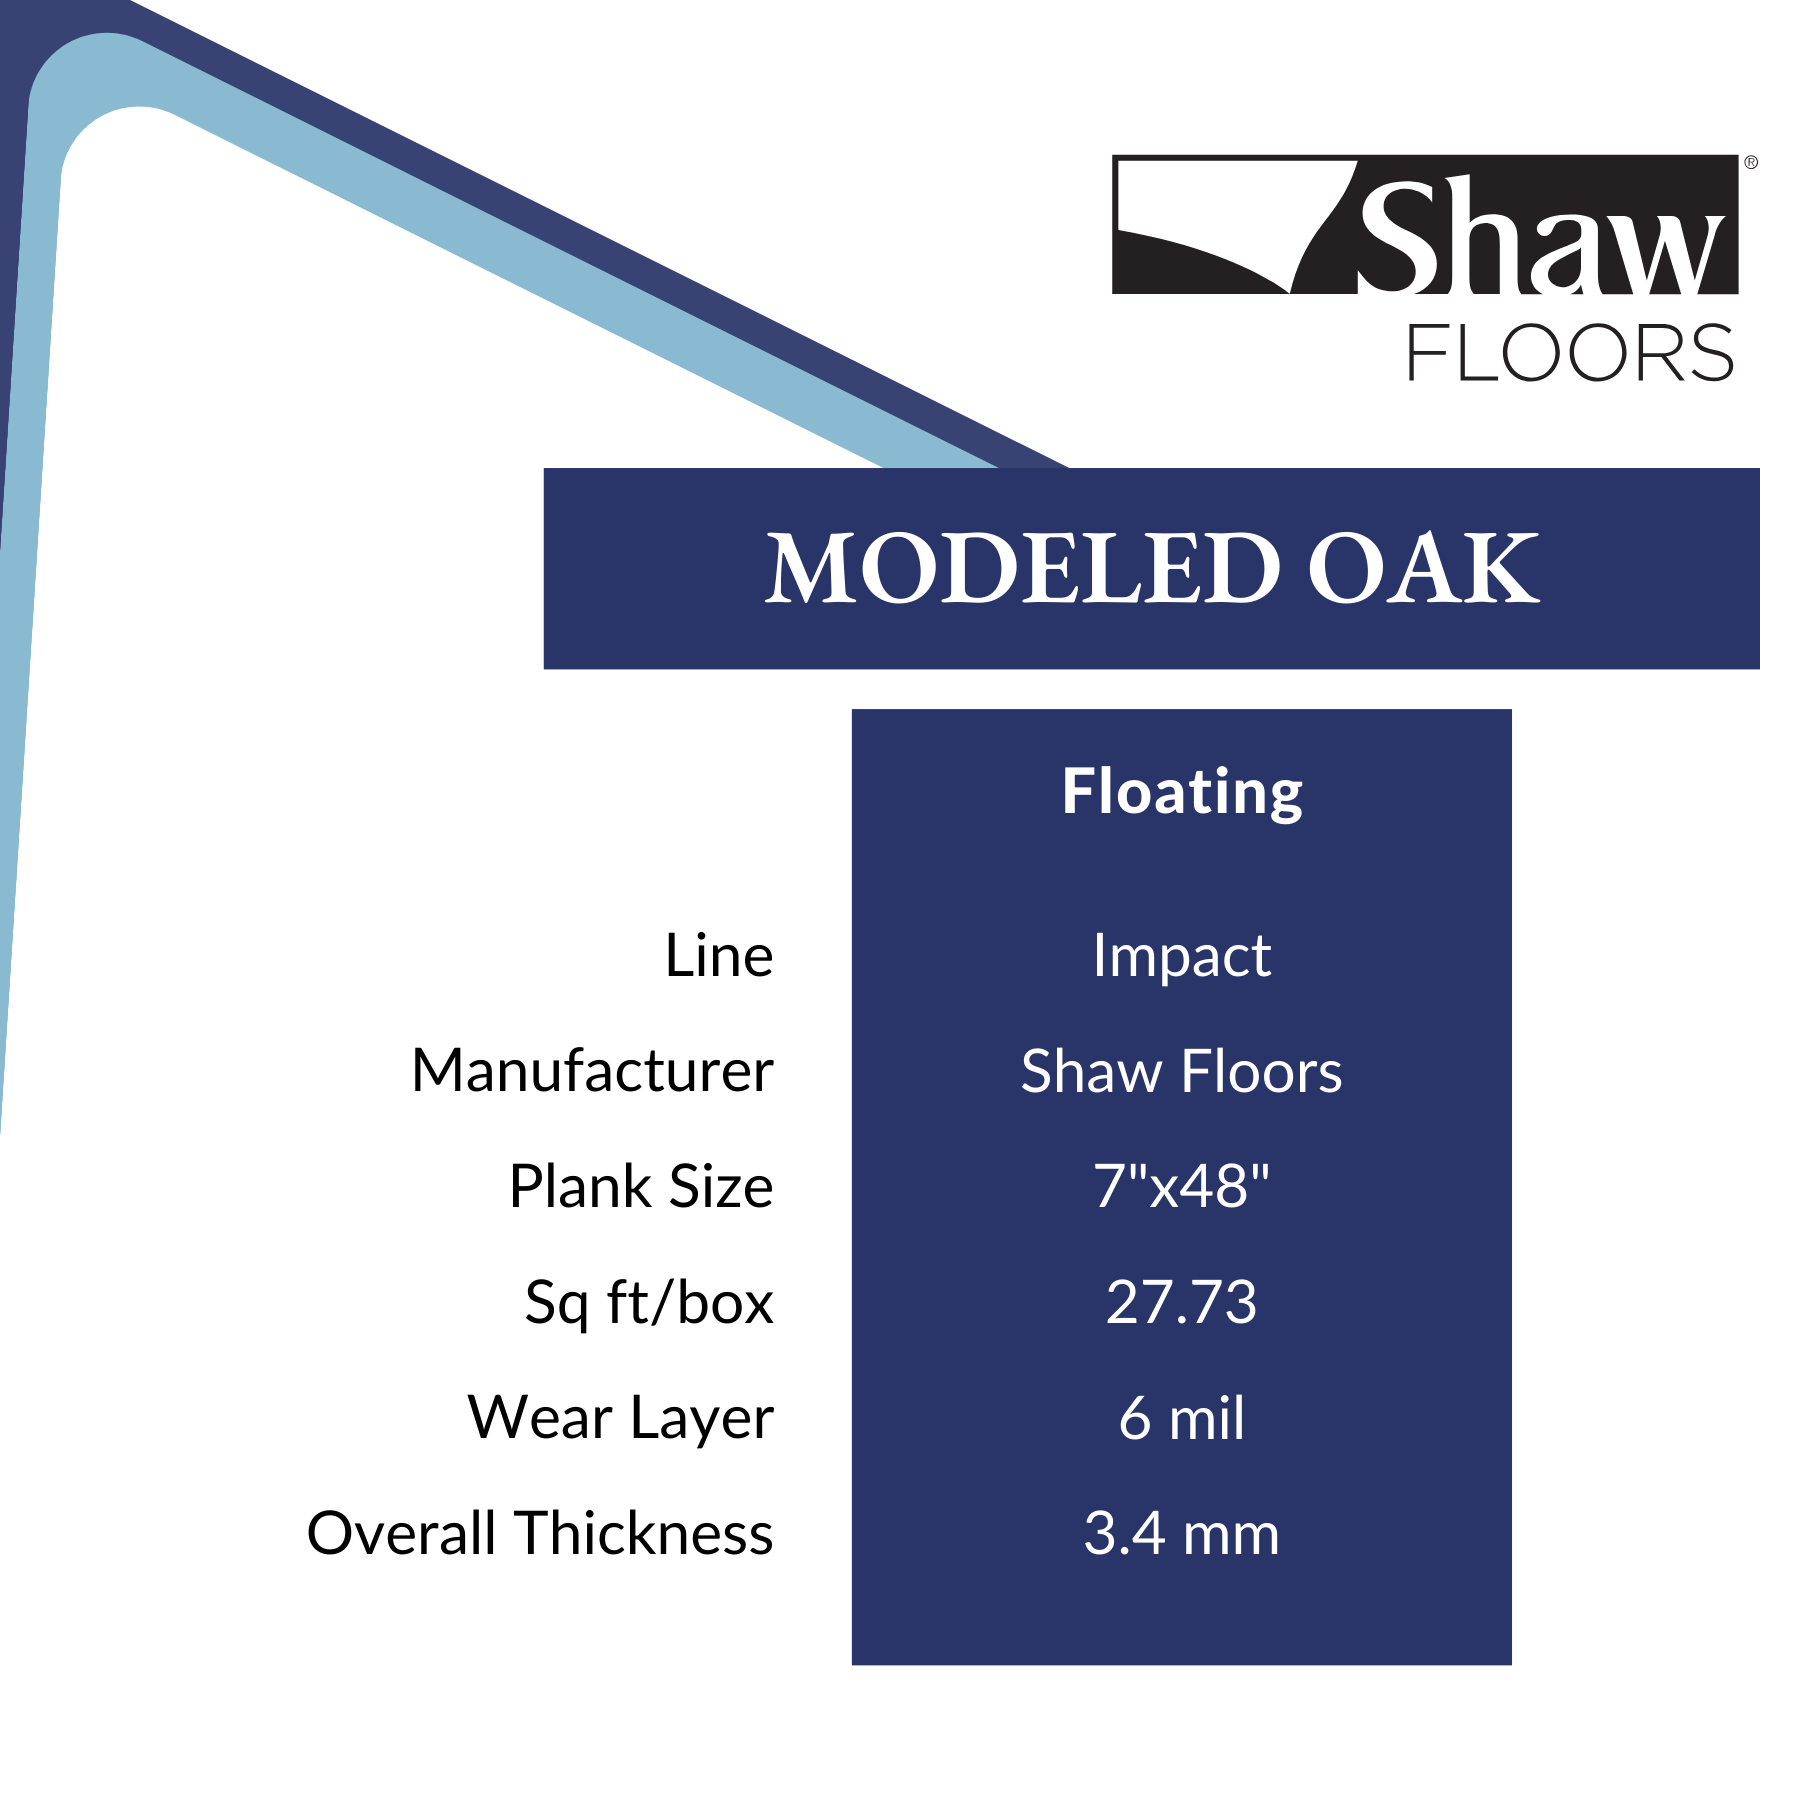 Modeled Oak by Shaw, Clearance at Calhoun's in Springfield, IL Specs